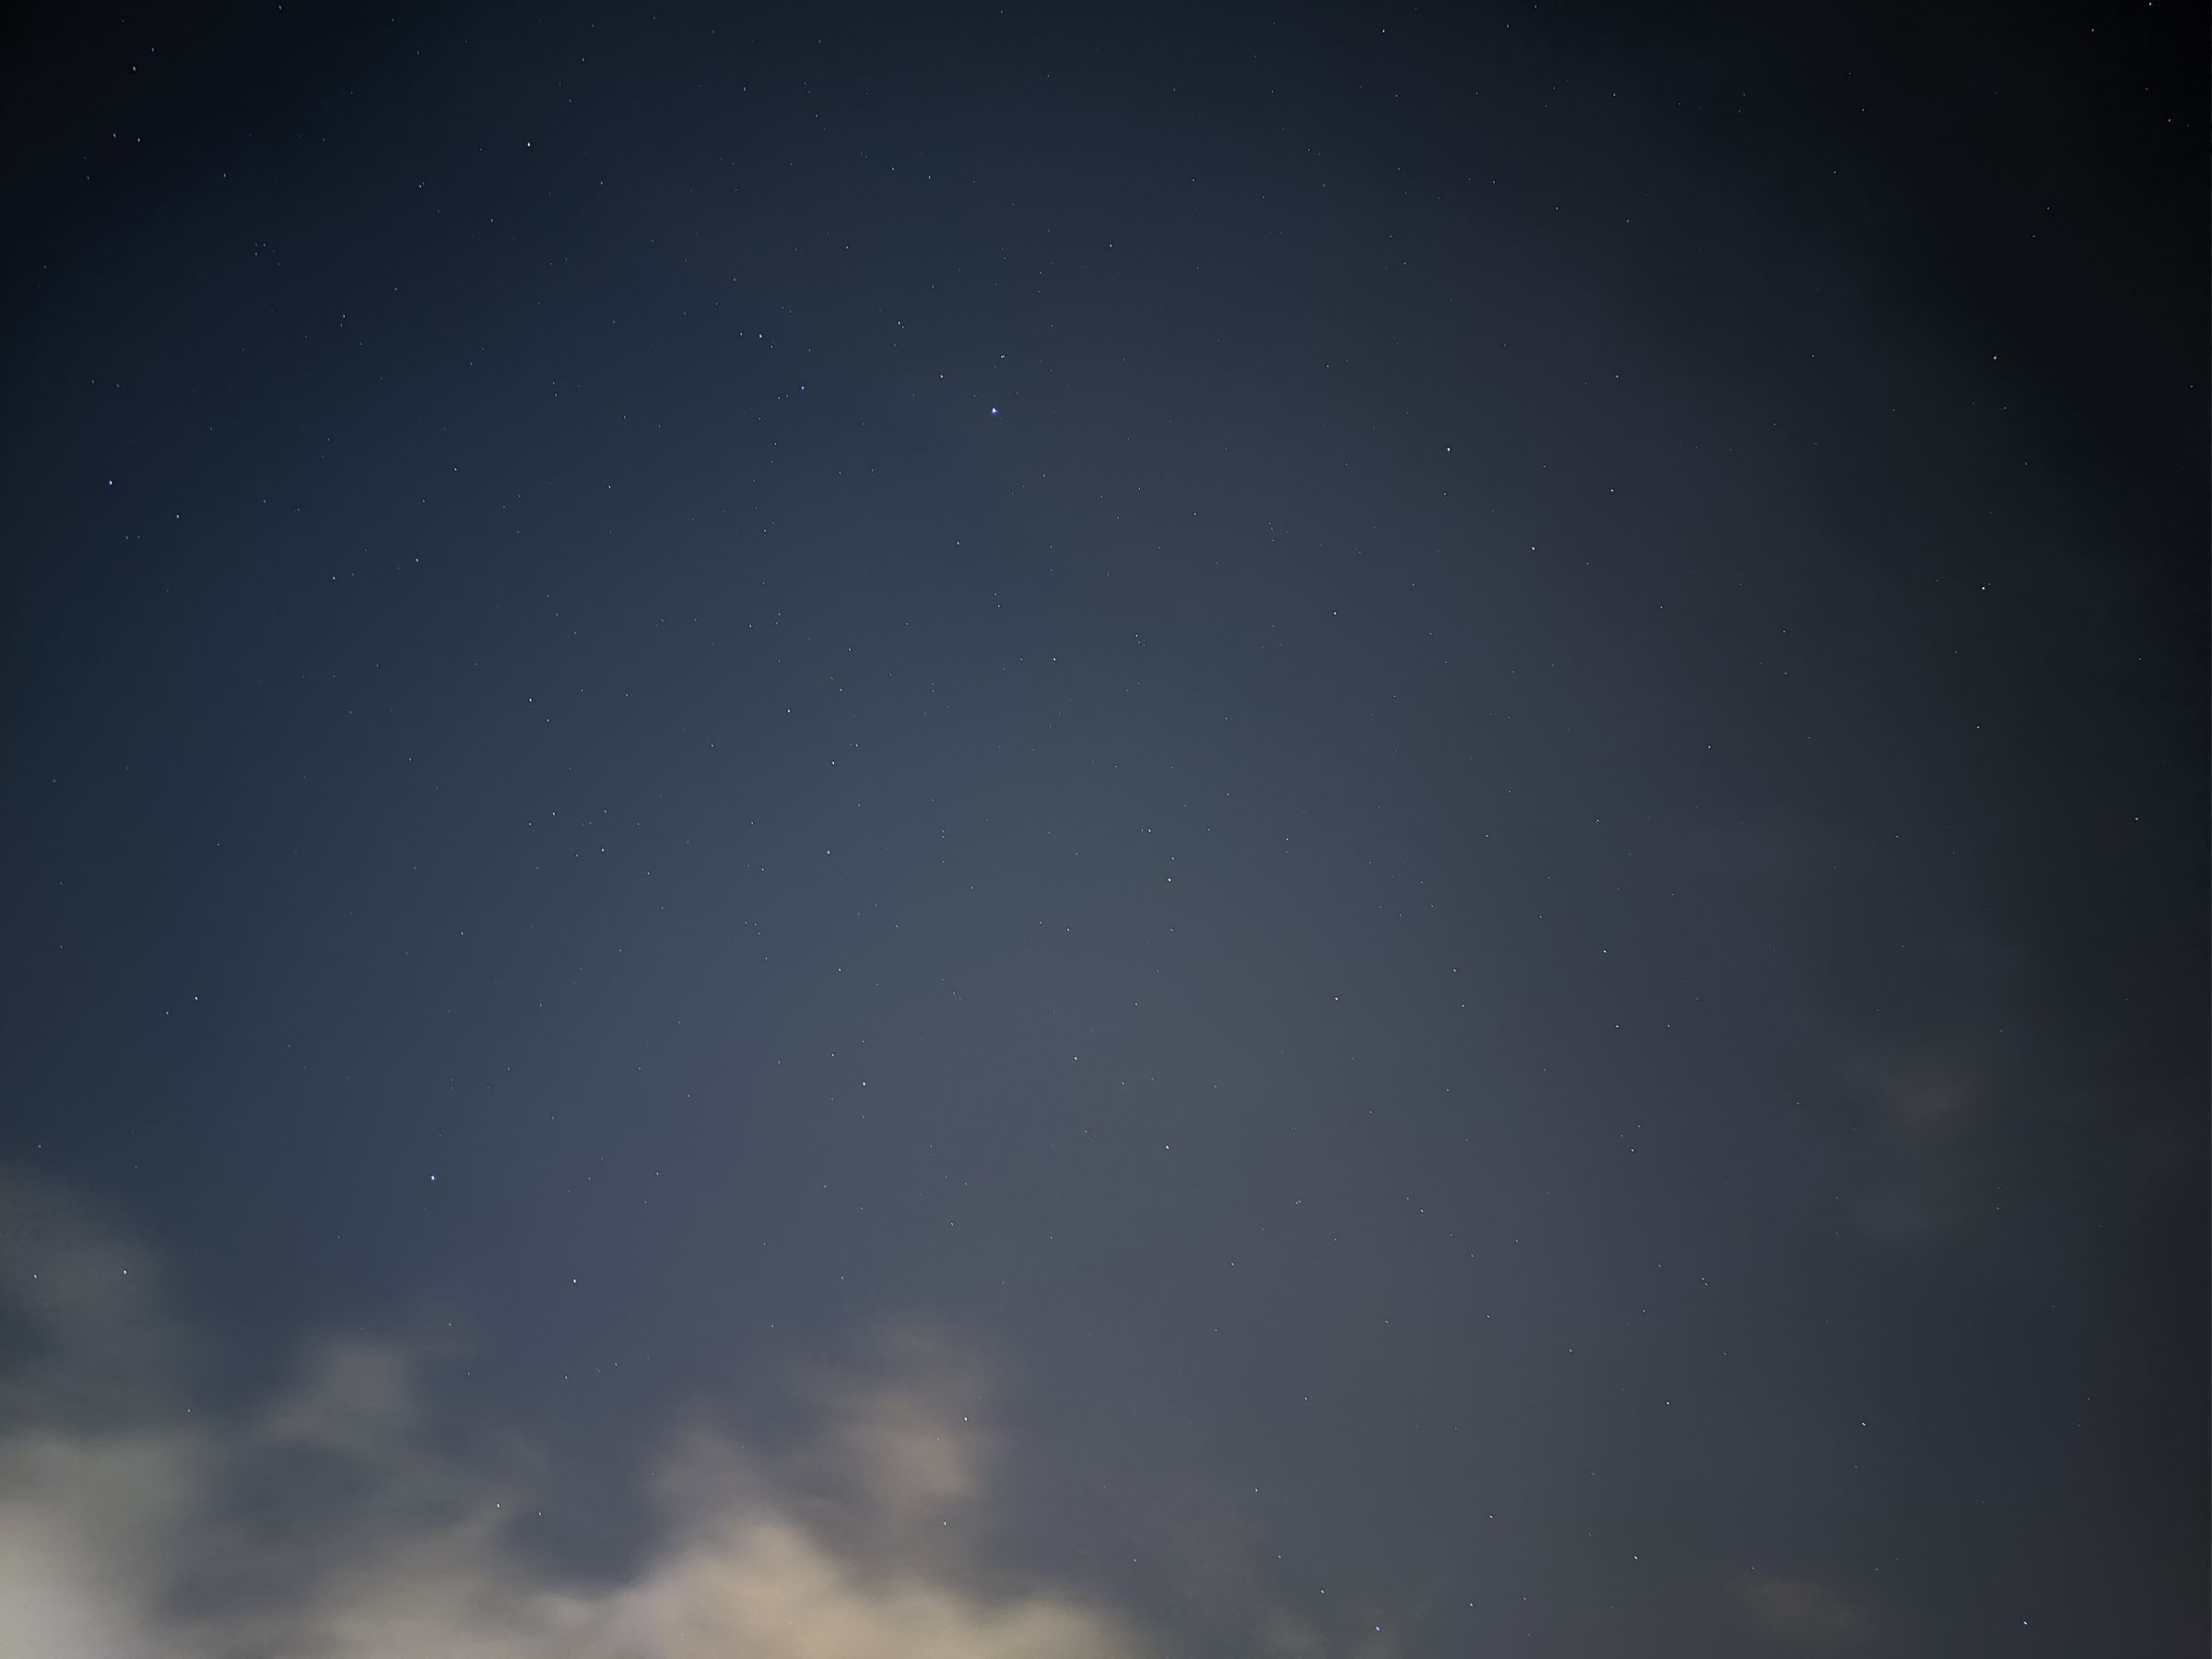 Pixel 4, Astrophotography mode; Taken near the San Francisco Ferry Building (i.e. with lots of light pollution). Click for full, uncompressed image.